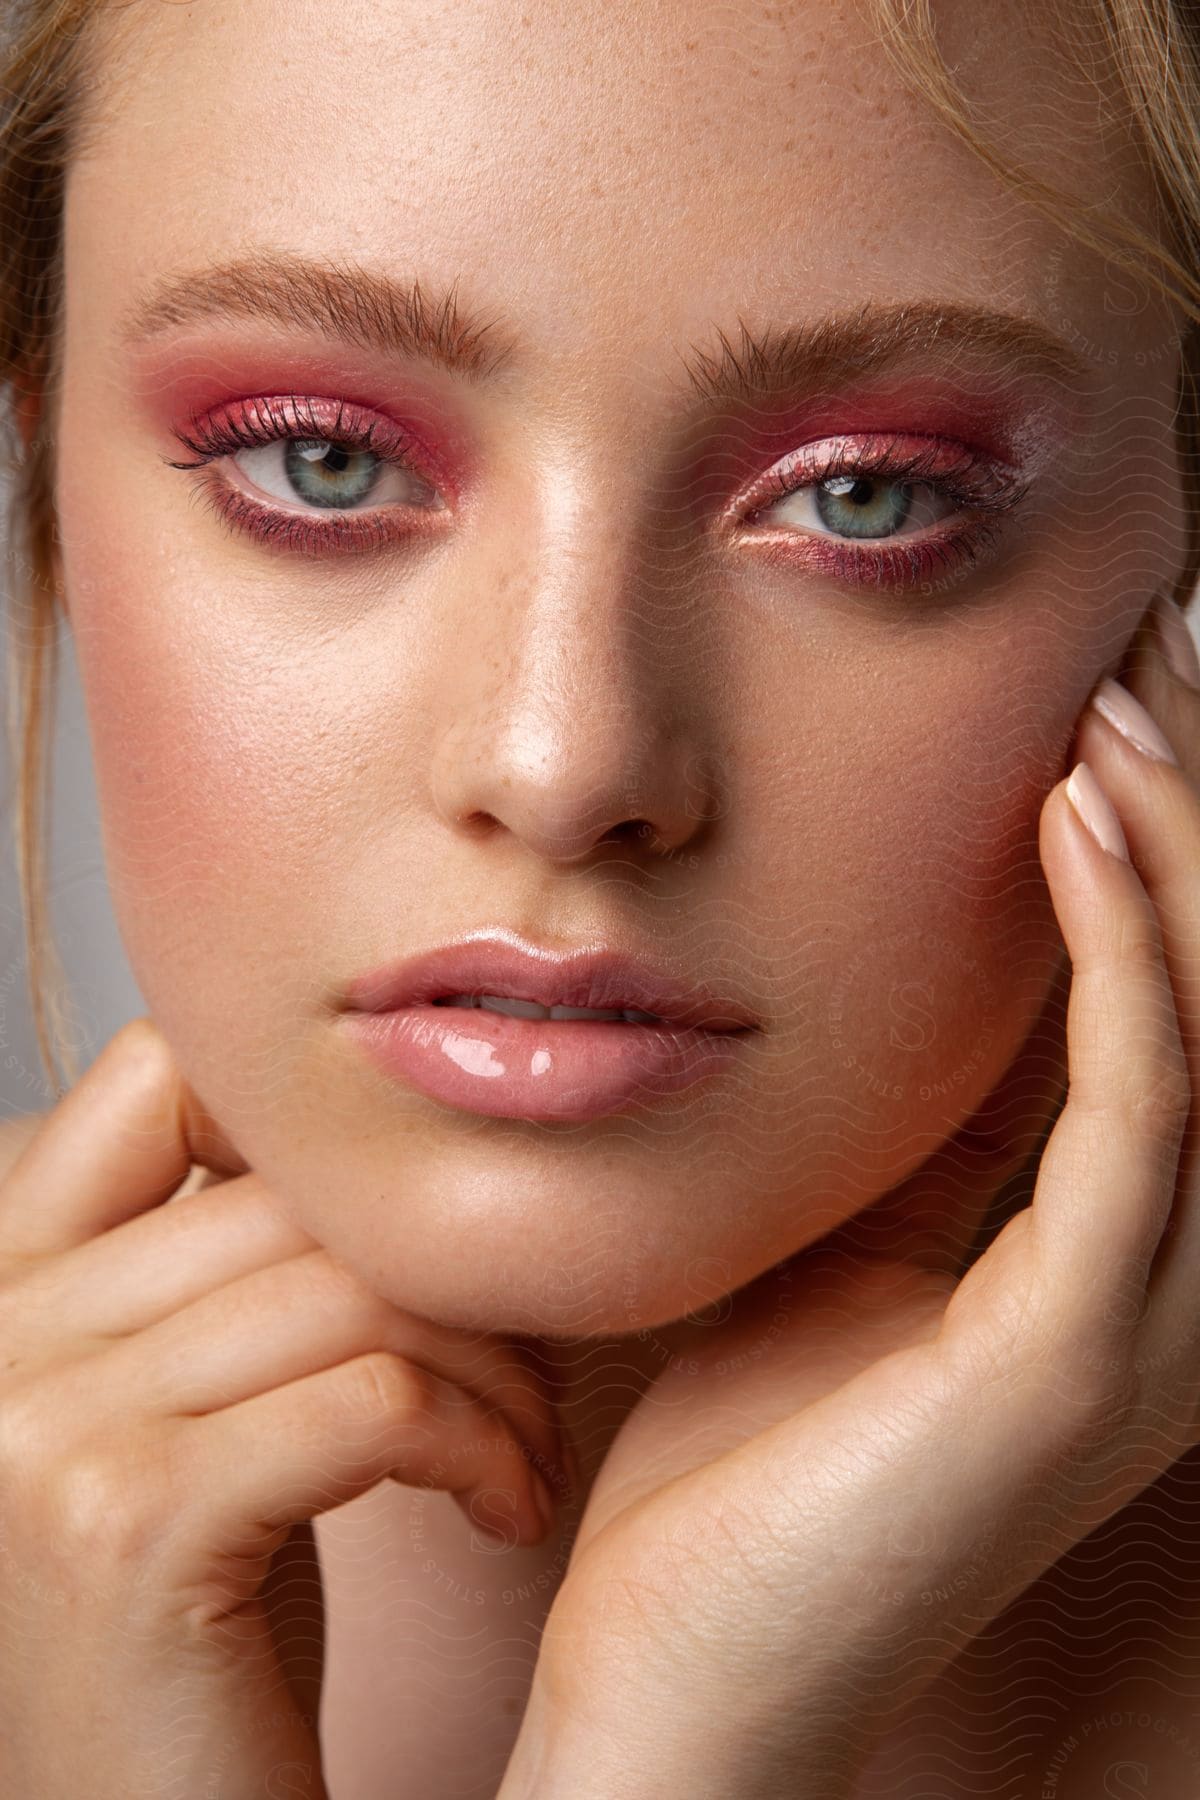 A young woman modelling makeup.